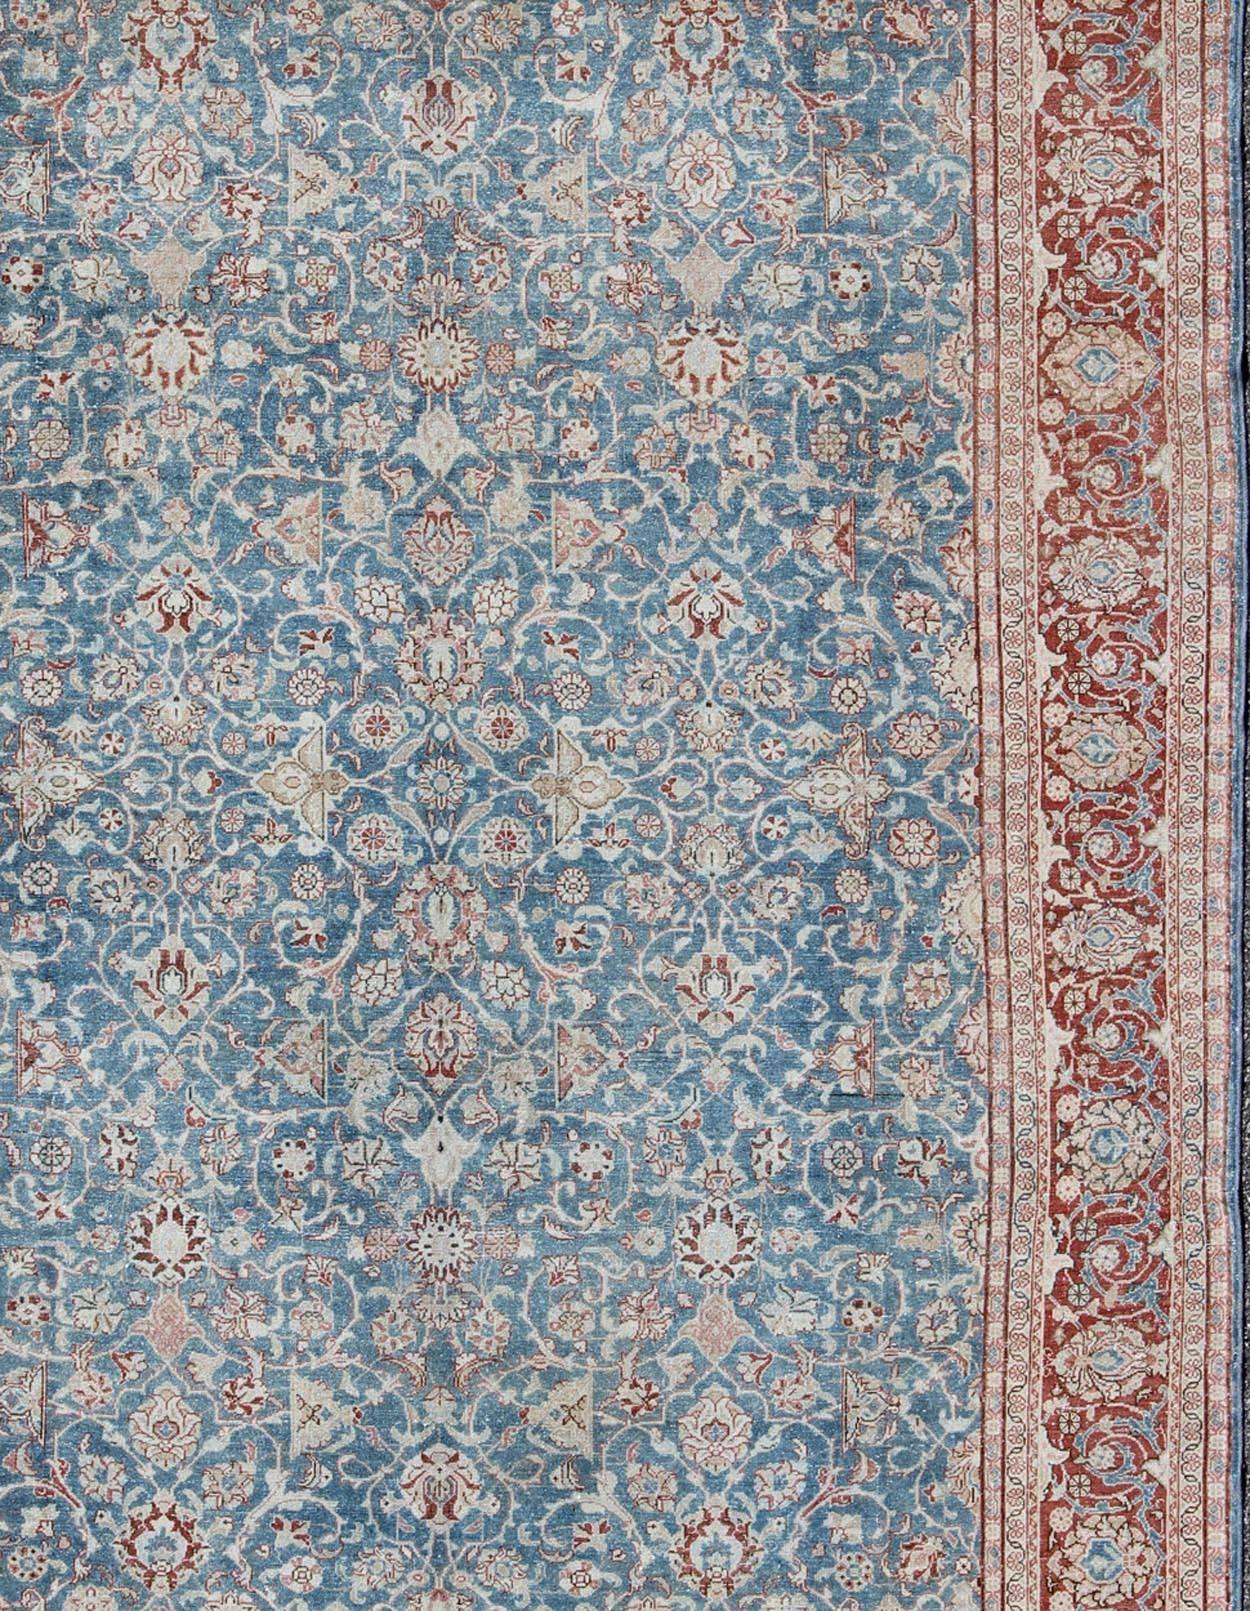 Blue and Red Antique Persian Malayer Rug with All-Over Design and Ornate Borders In Excellent Condition For Sale In Atlanta, GA